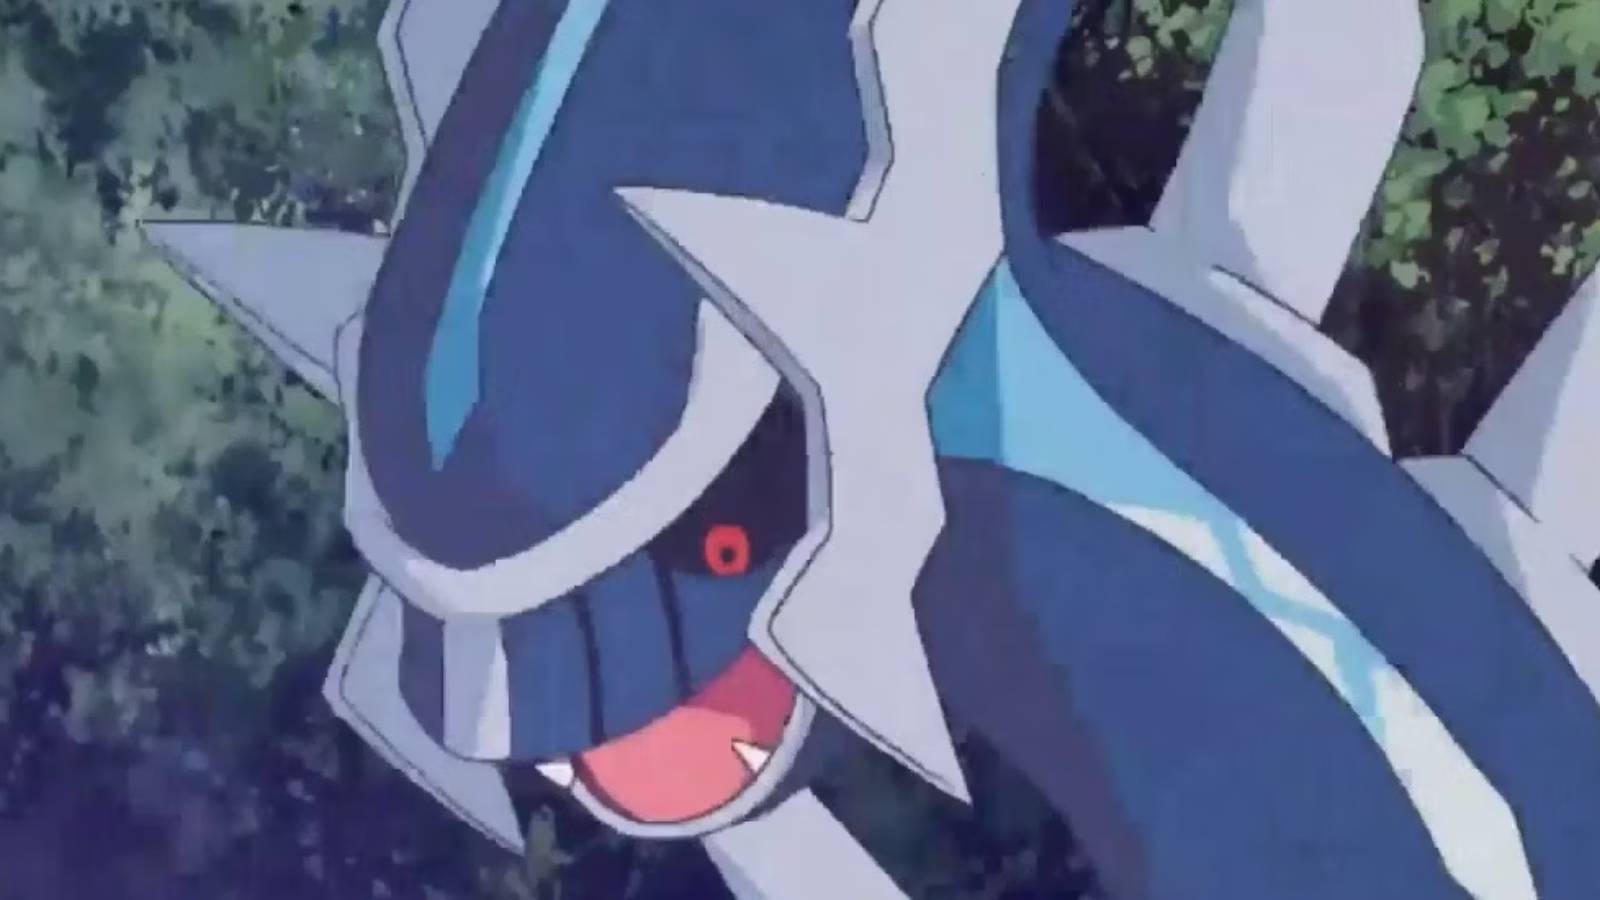 The Pokemon Dialga appears in a close up shot, looking bemused